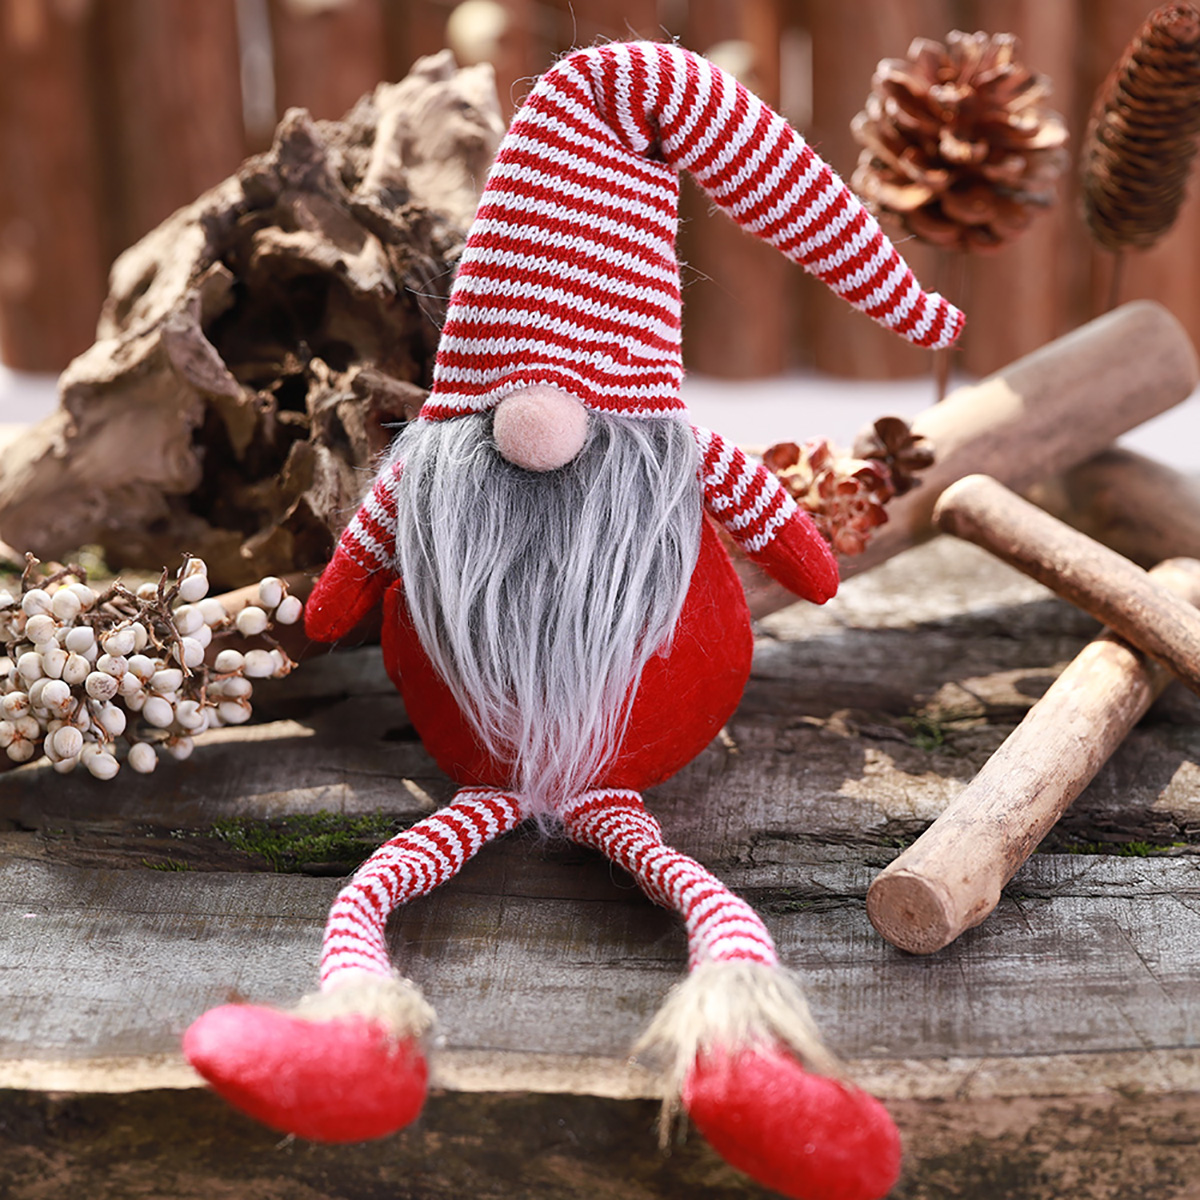 Non-Woven-Hat-With-Long-Legs-Handmade-Gnome-Santa-Christmas-Figurines-Ornament-Decorations-Toys-1636850-4